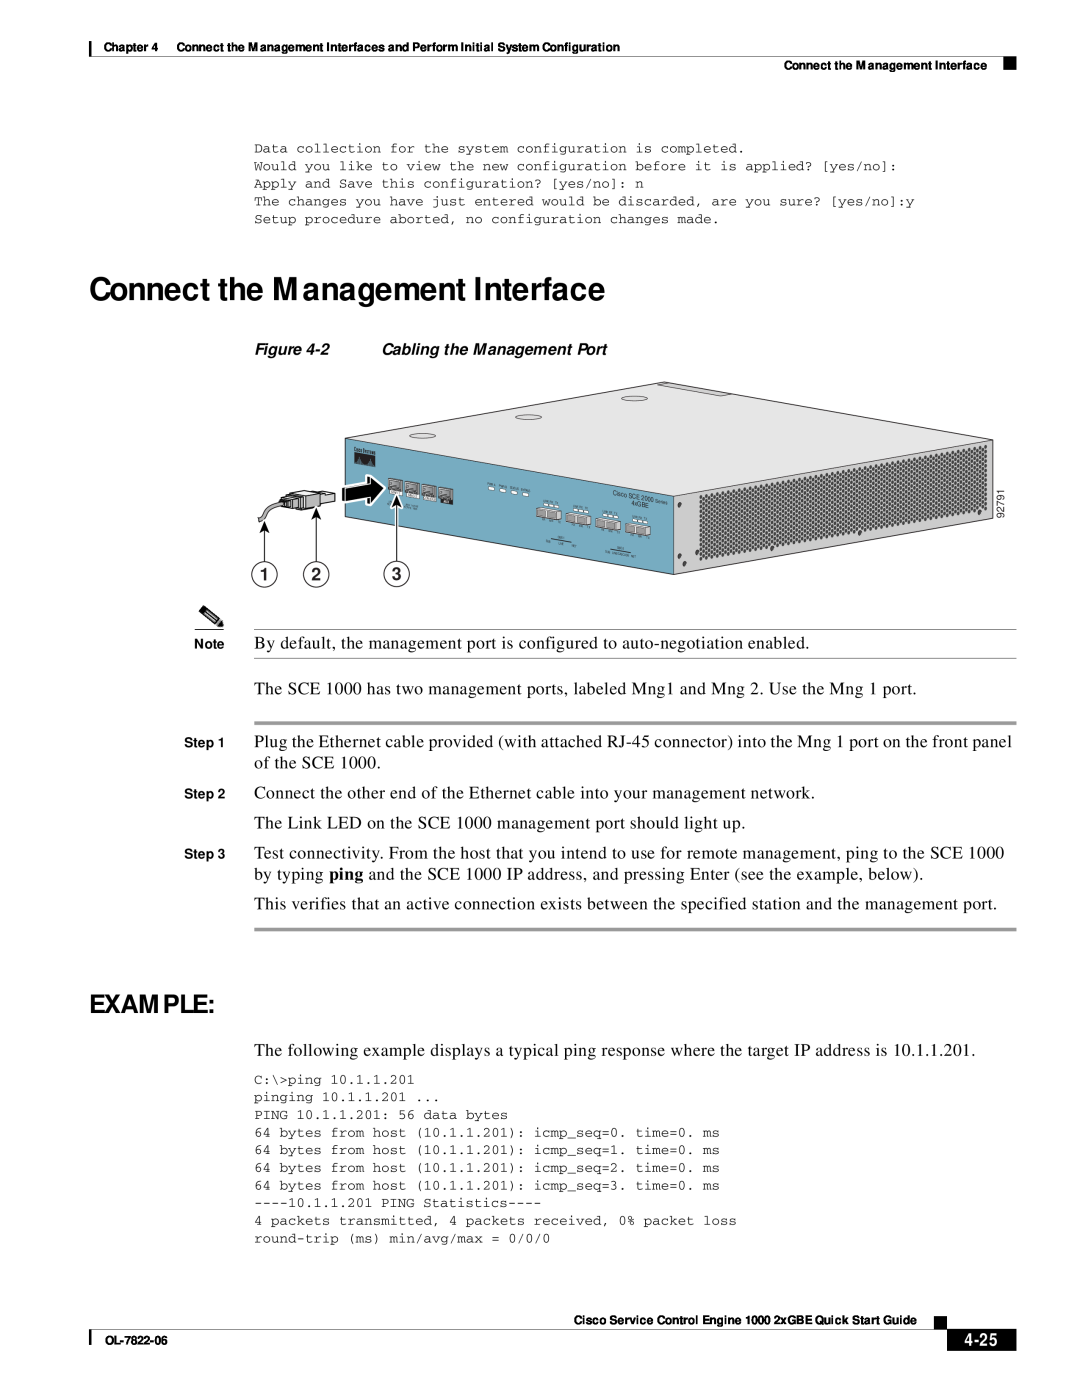 Cisco Systems OL-7822-06 quick start Connect the Management Interface, Example, 4-25 